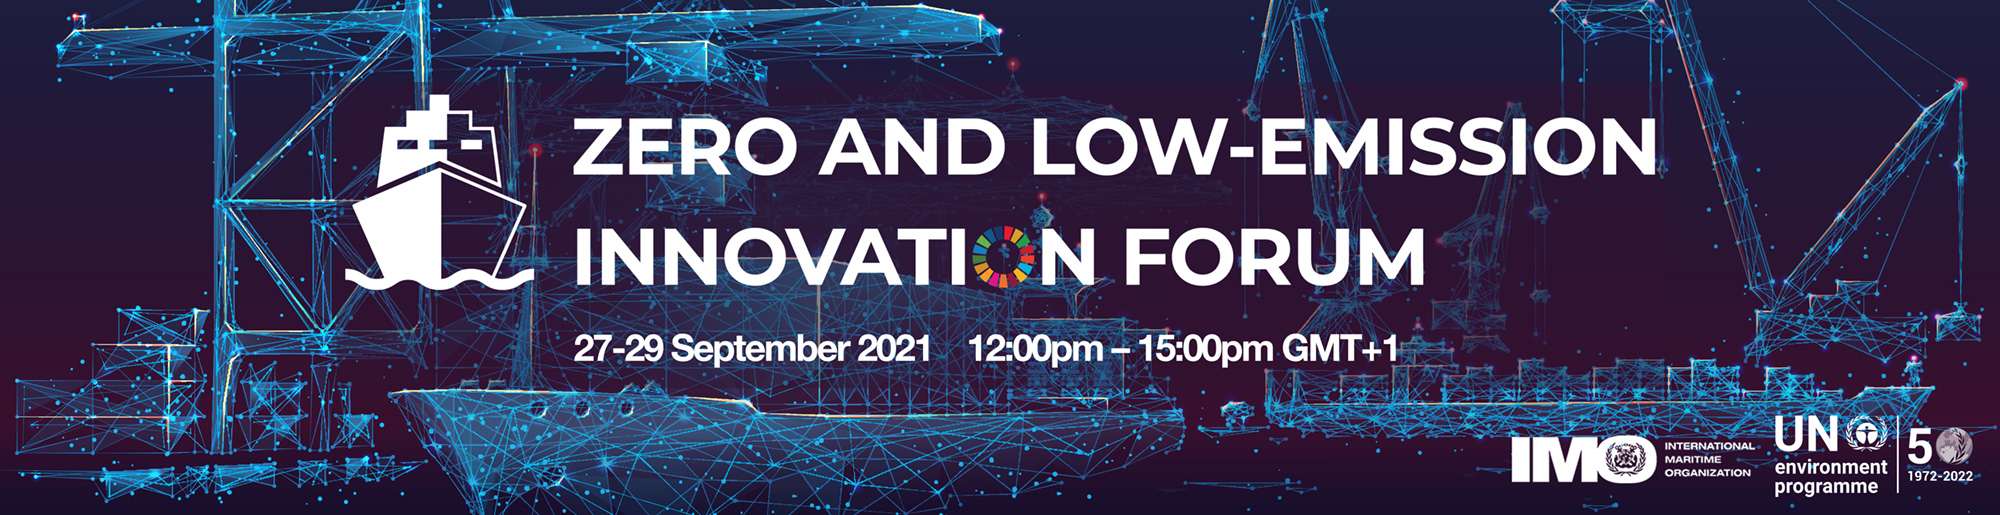 Zero-and Low-Emission Innovation Forum: 27-29 September 2021